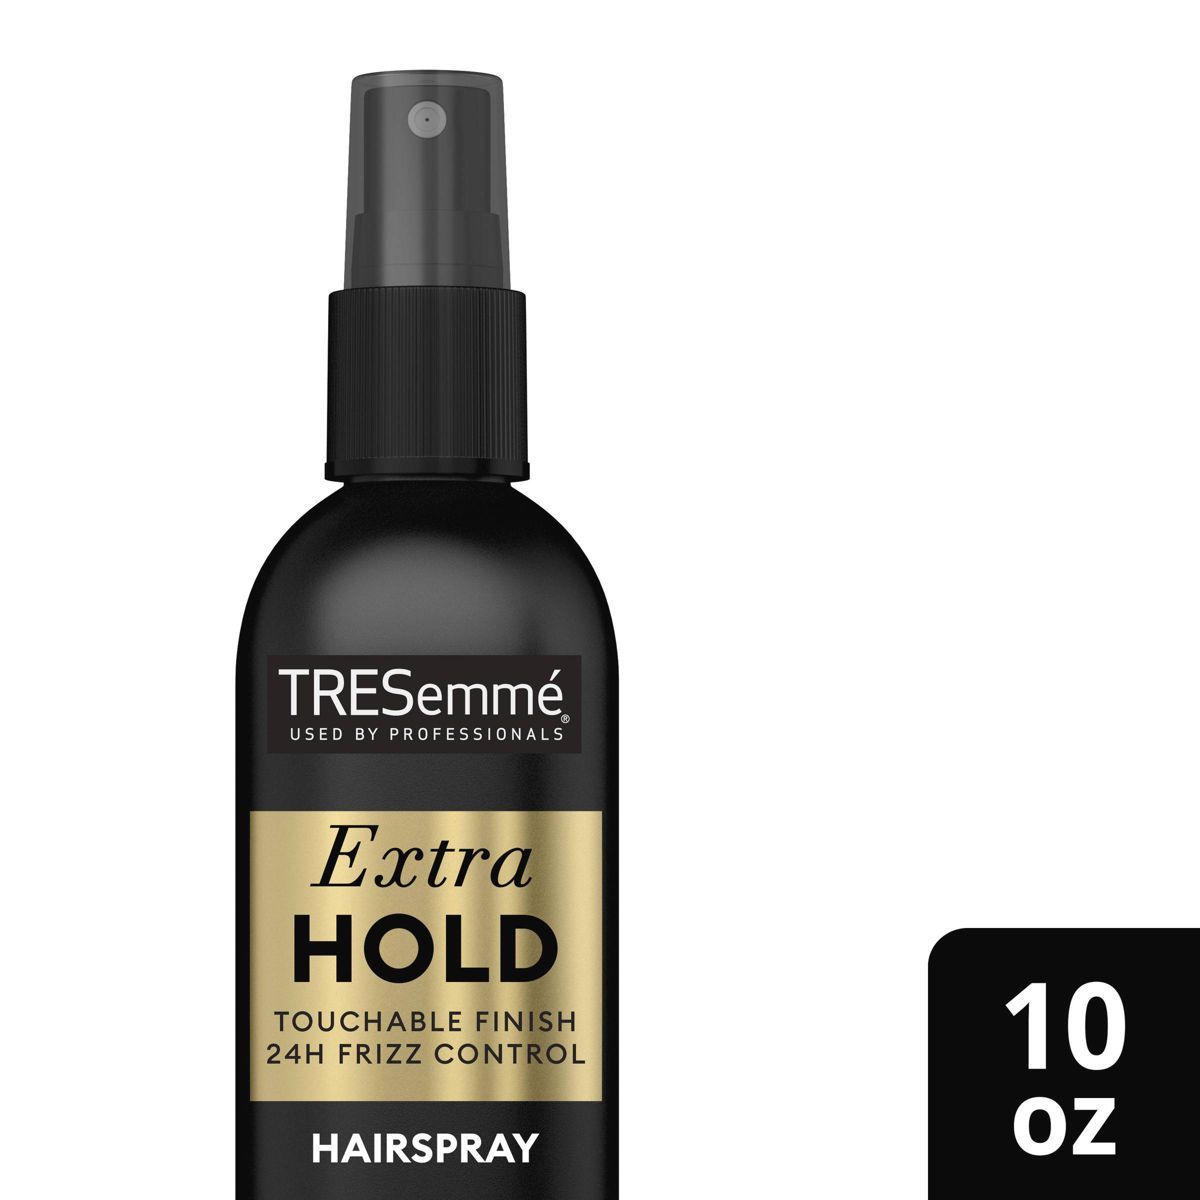 Tresemme Extra Hold Hairspray for 24-Hour Frizz Control | Target